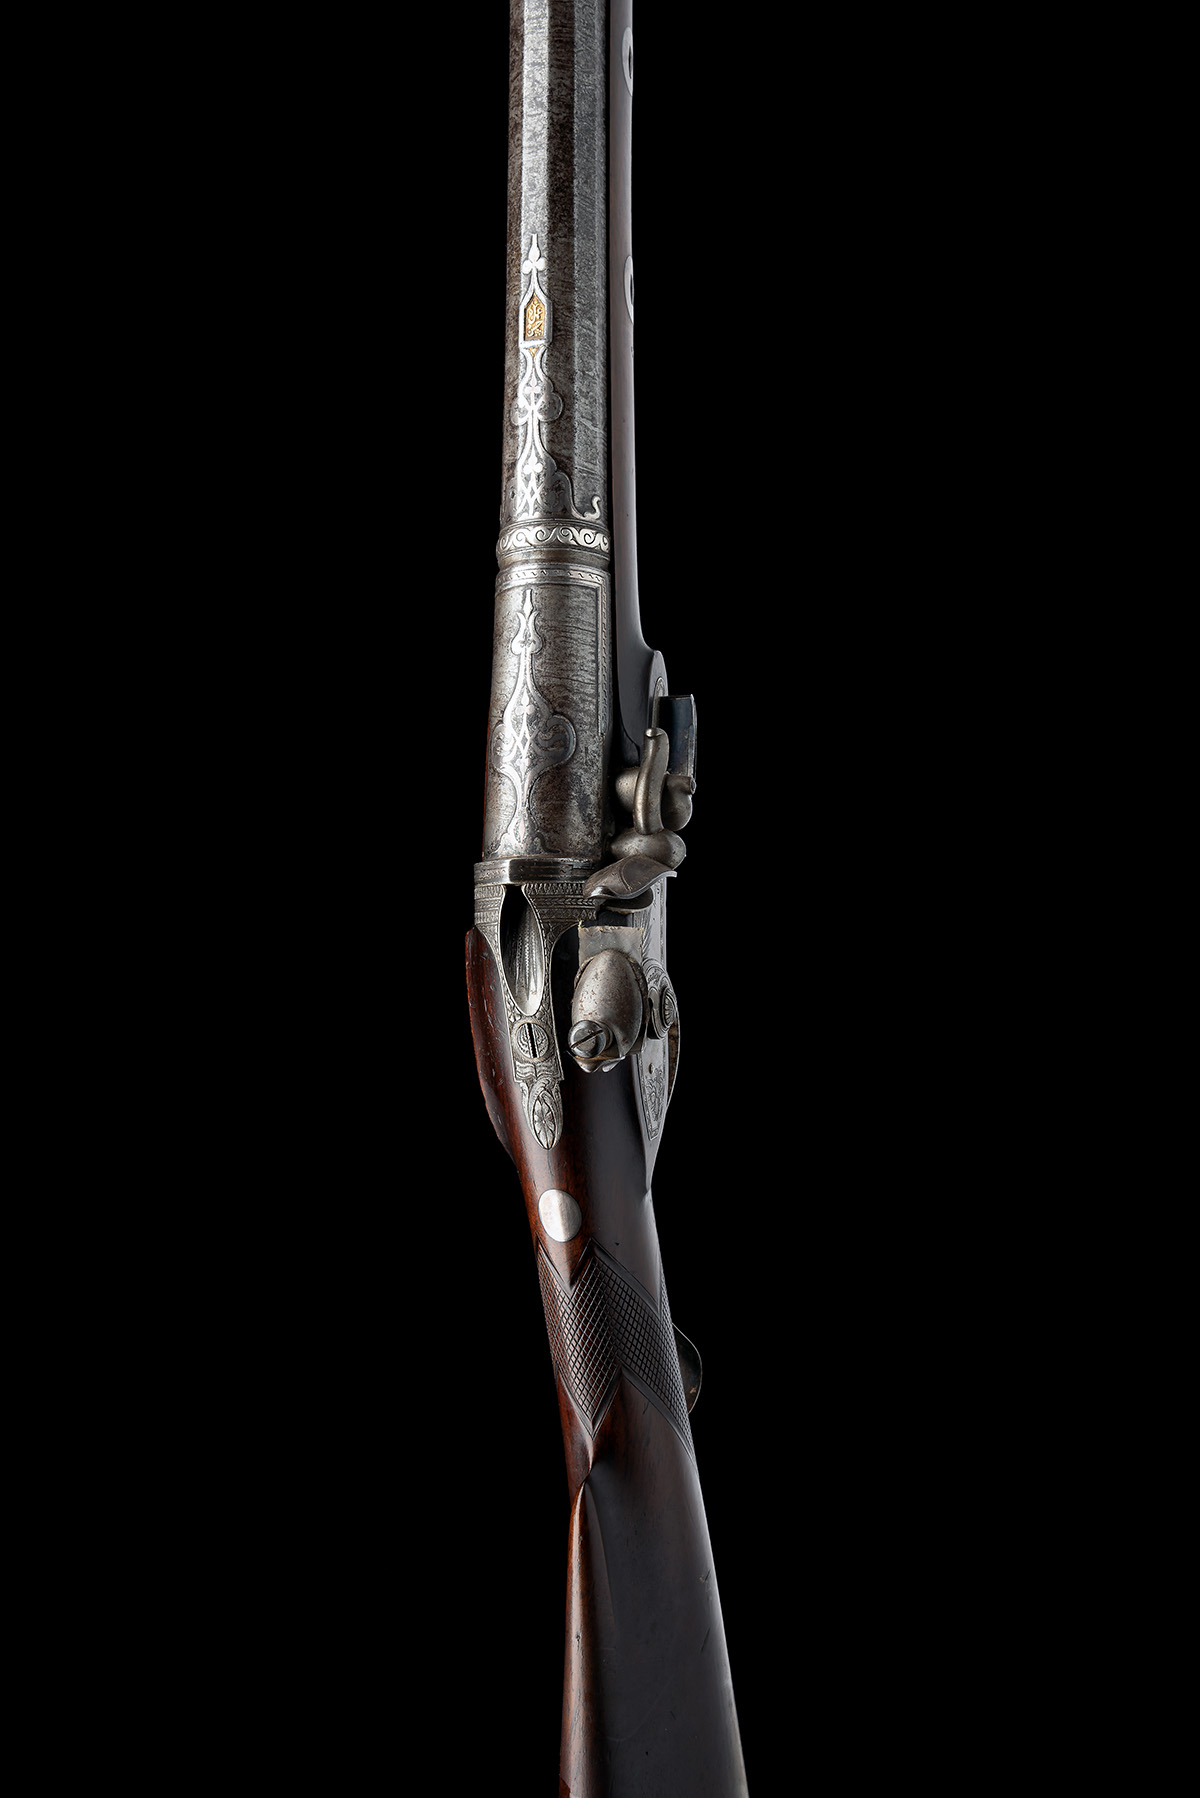 A FINE 10-BORE FLINTLOCK SPORTING MUSKET SIGNED MACLAUCHLAN, EDINBURGH, WITH INLAID TURKISH - Image 4 of 10